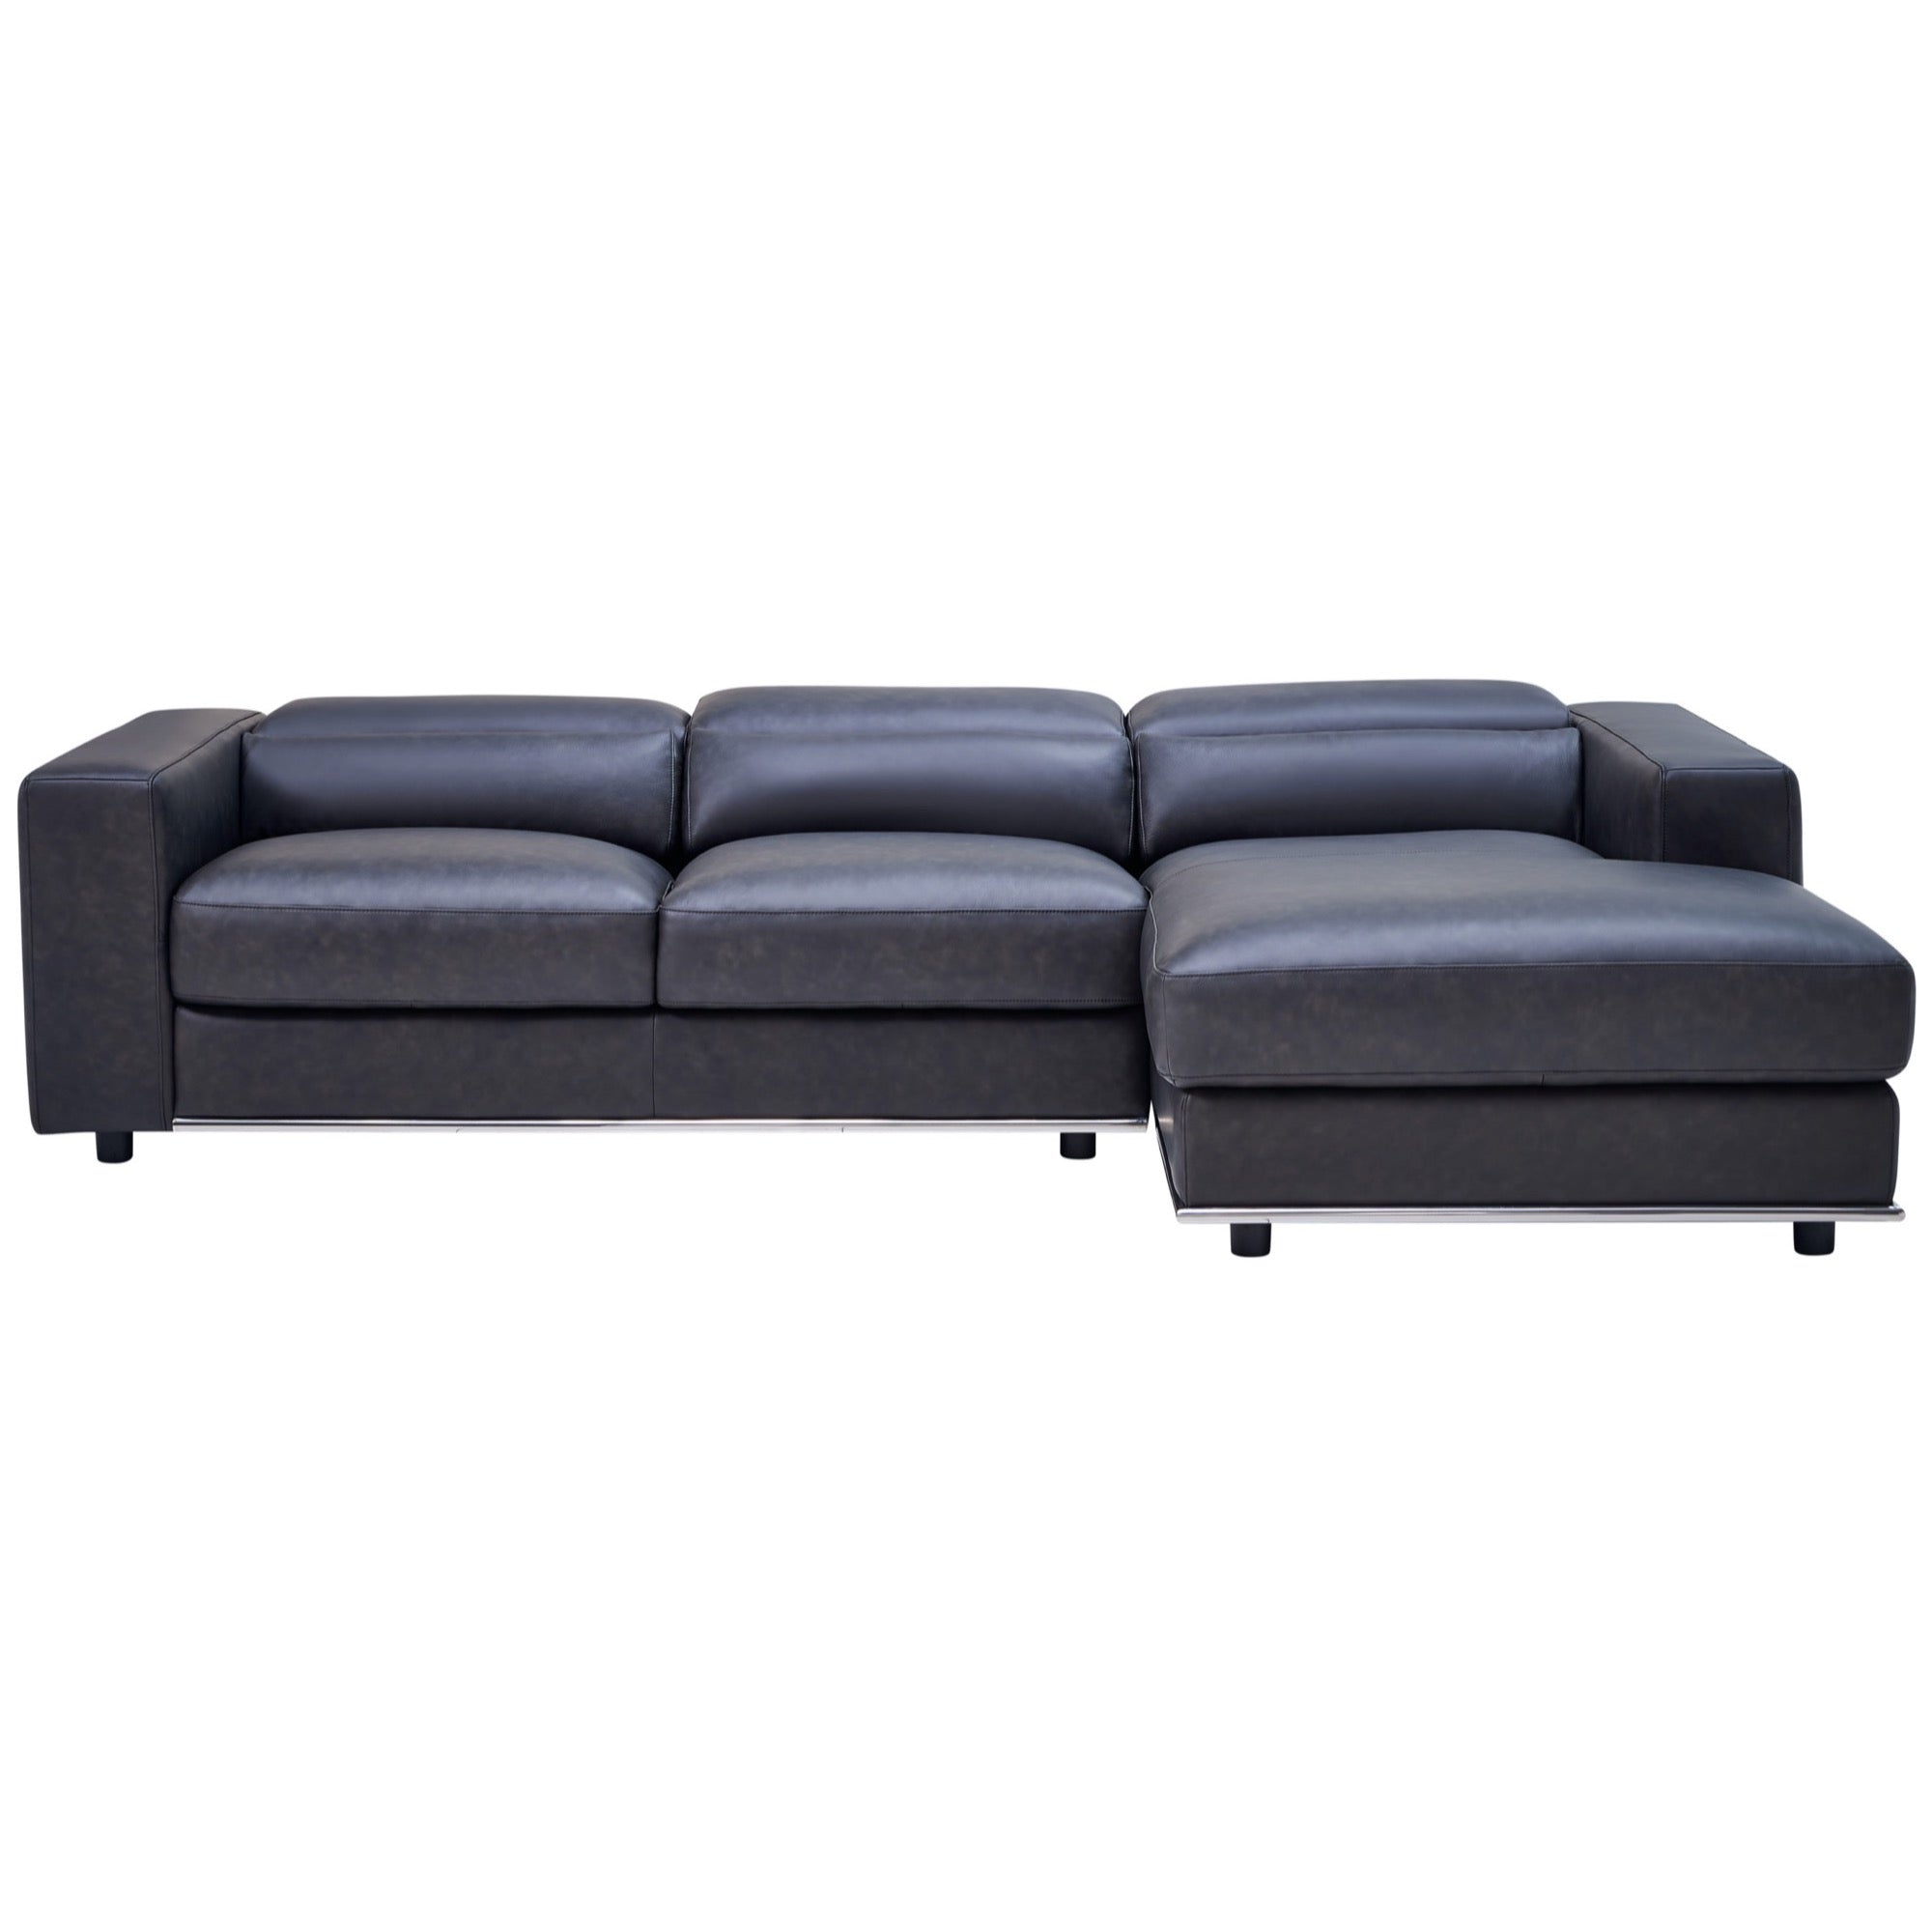 Grayson Charcoal Leather Sectional